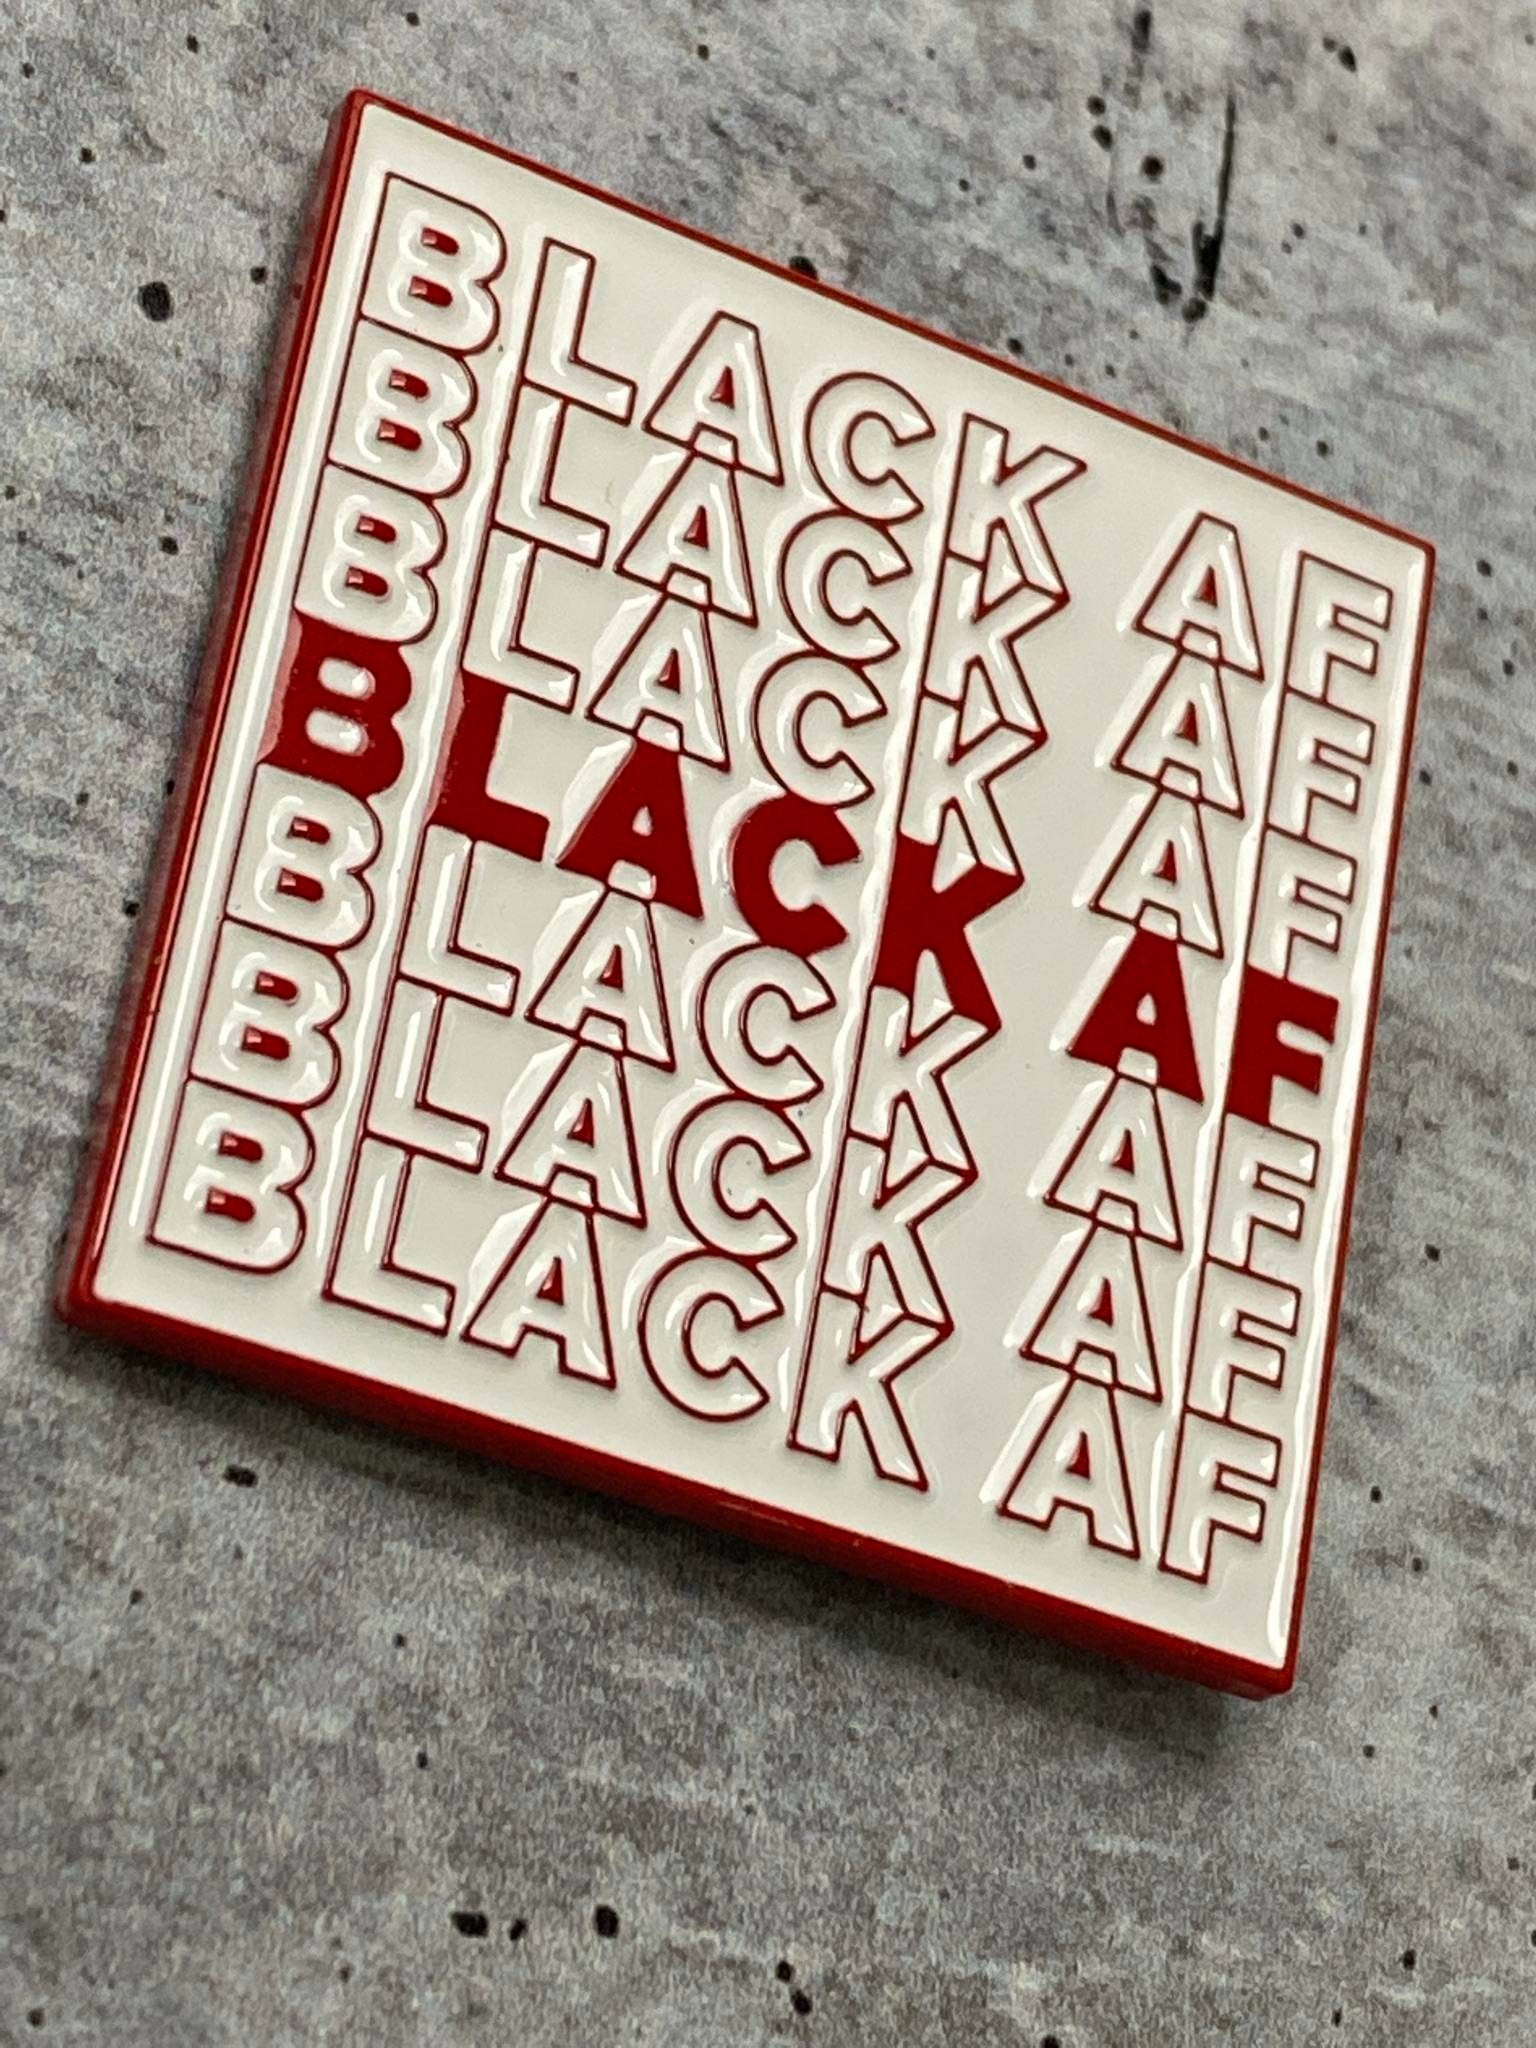 New Enamel Pin, "Black AF" Exclusive Lapel Pin, African American Enamel Pins, Size 1.77 inches, w/Butterfly Clutch, Cool Pins